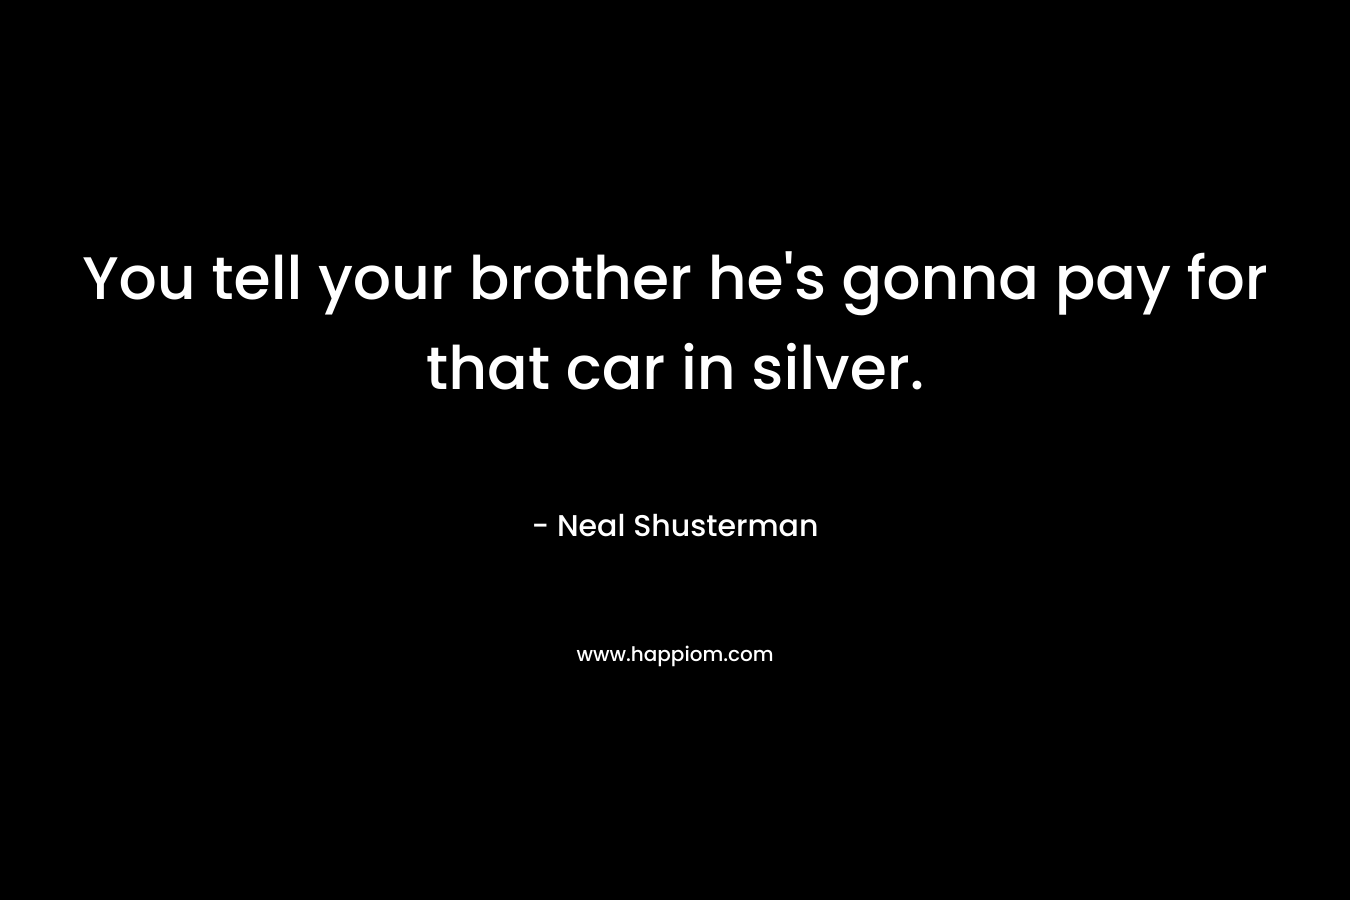 You tell your brother he’s gonna pay for that car in silver. – Neal Shusterman